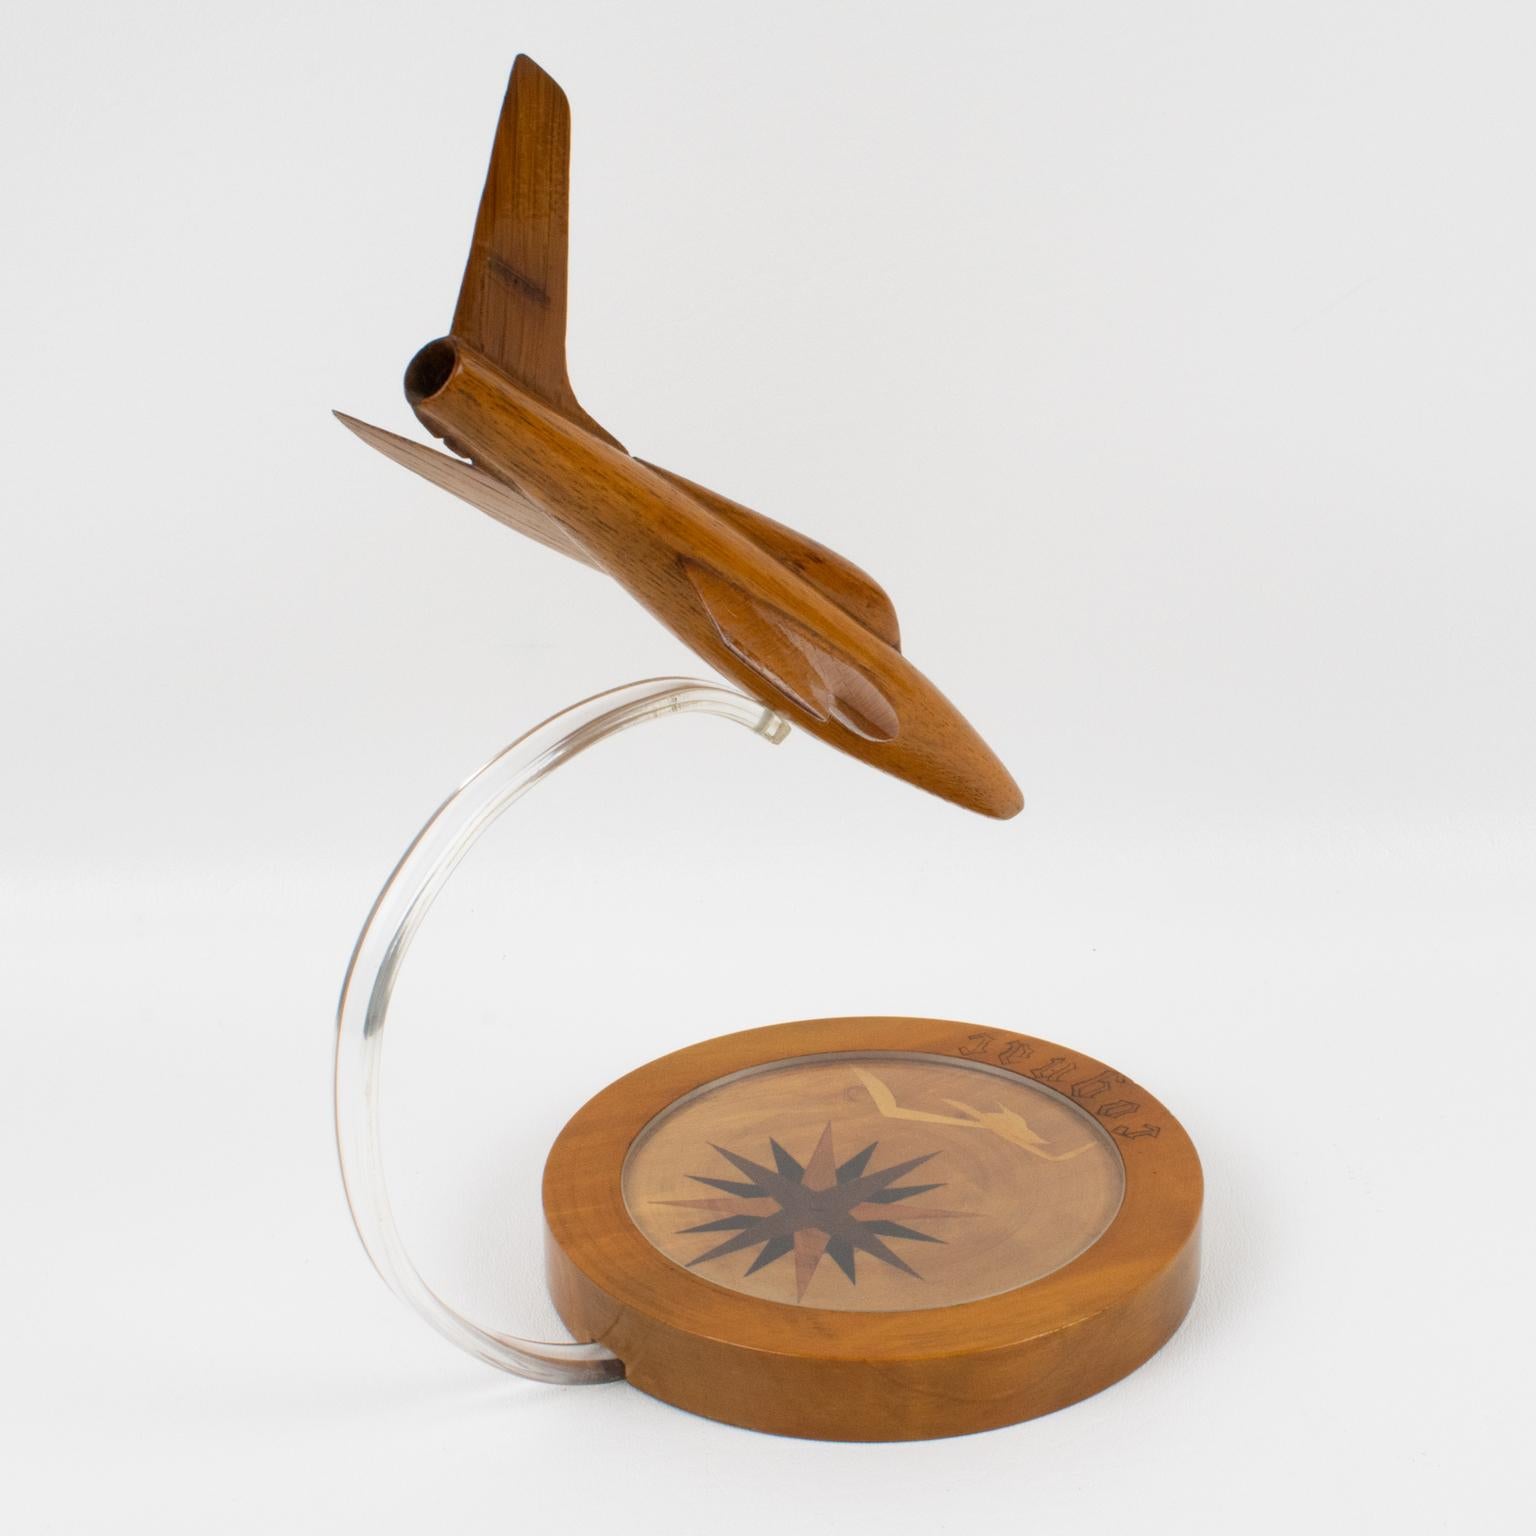 French Art Deco Wooden Airplane Jet Aviation Model